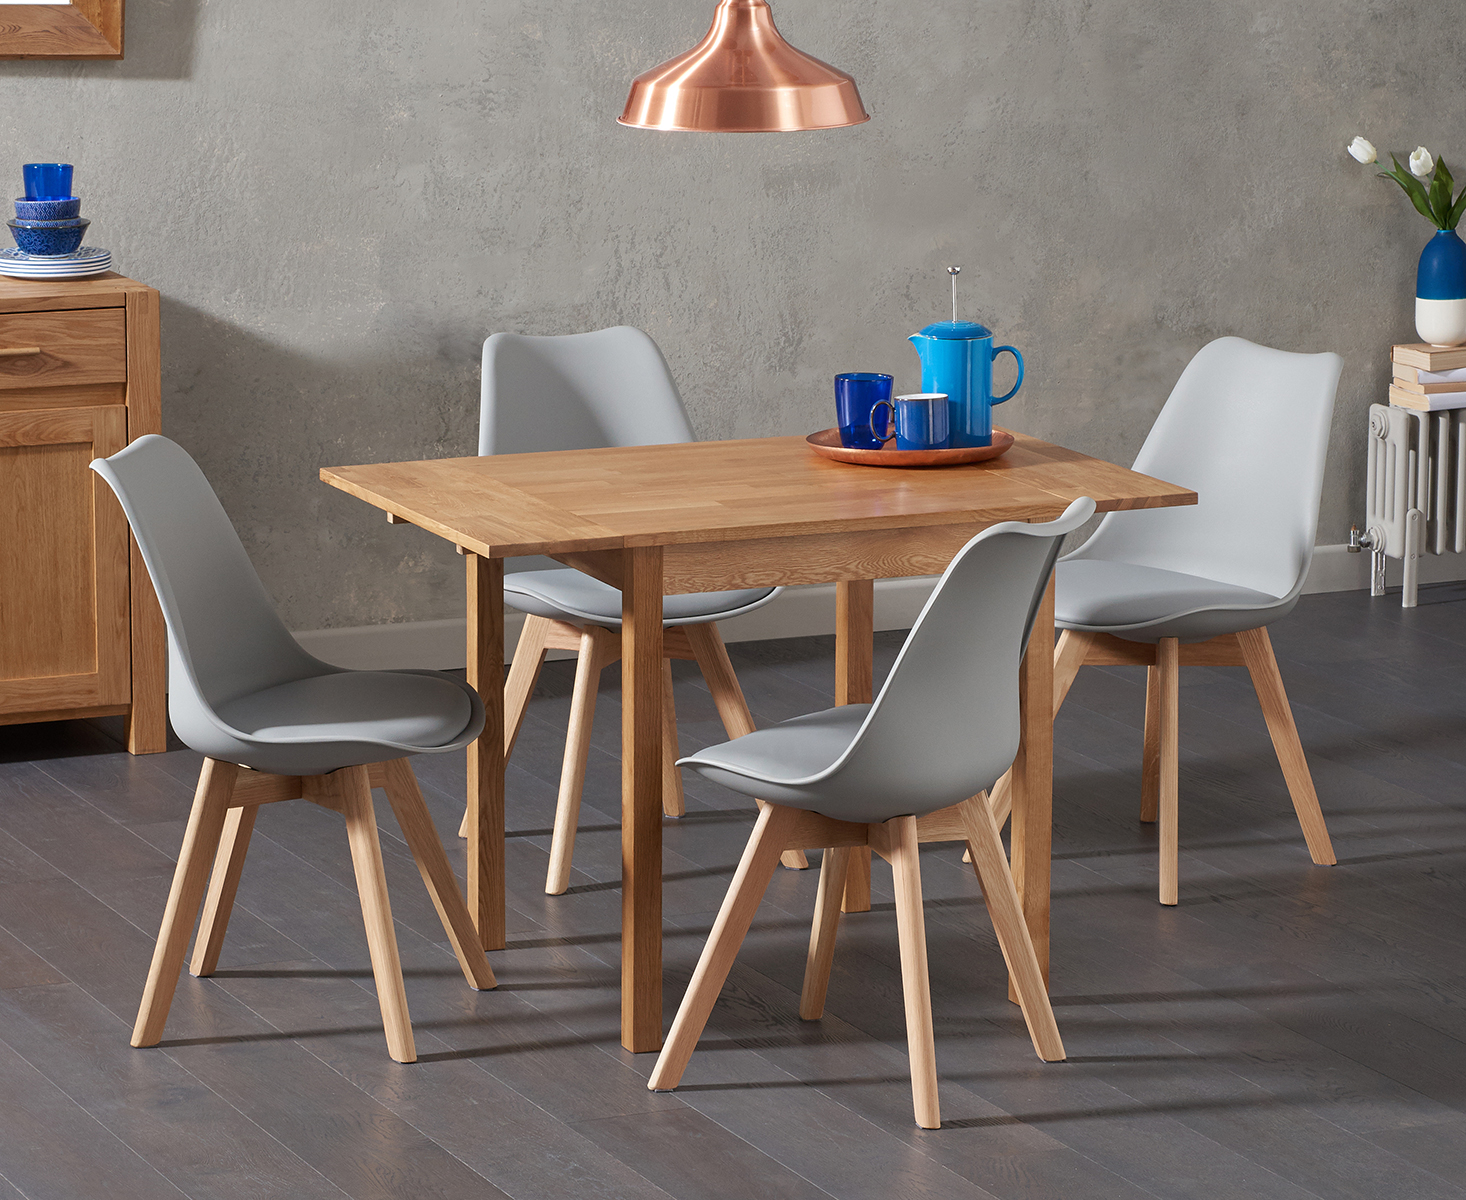 Extending York 70cm Solid Oak Dining Table With 4 White Orson Faux Leather Chairs